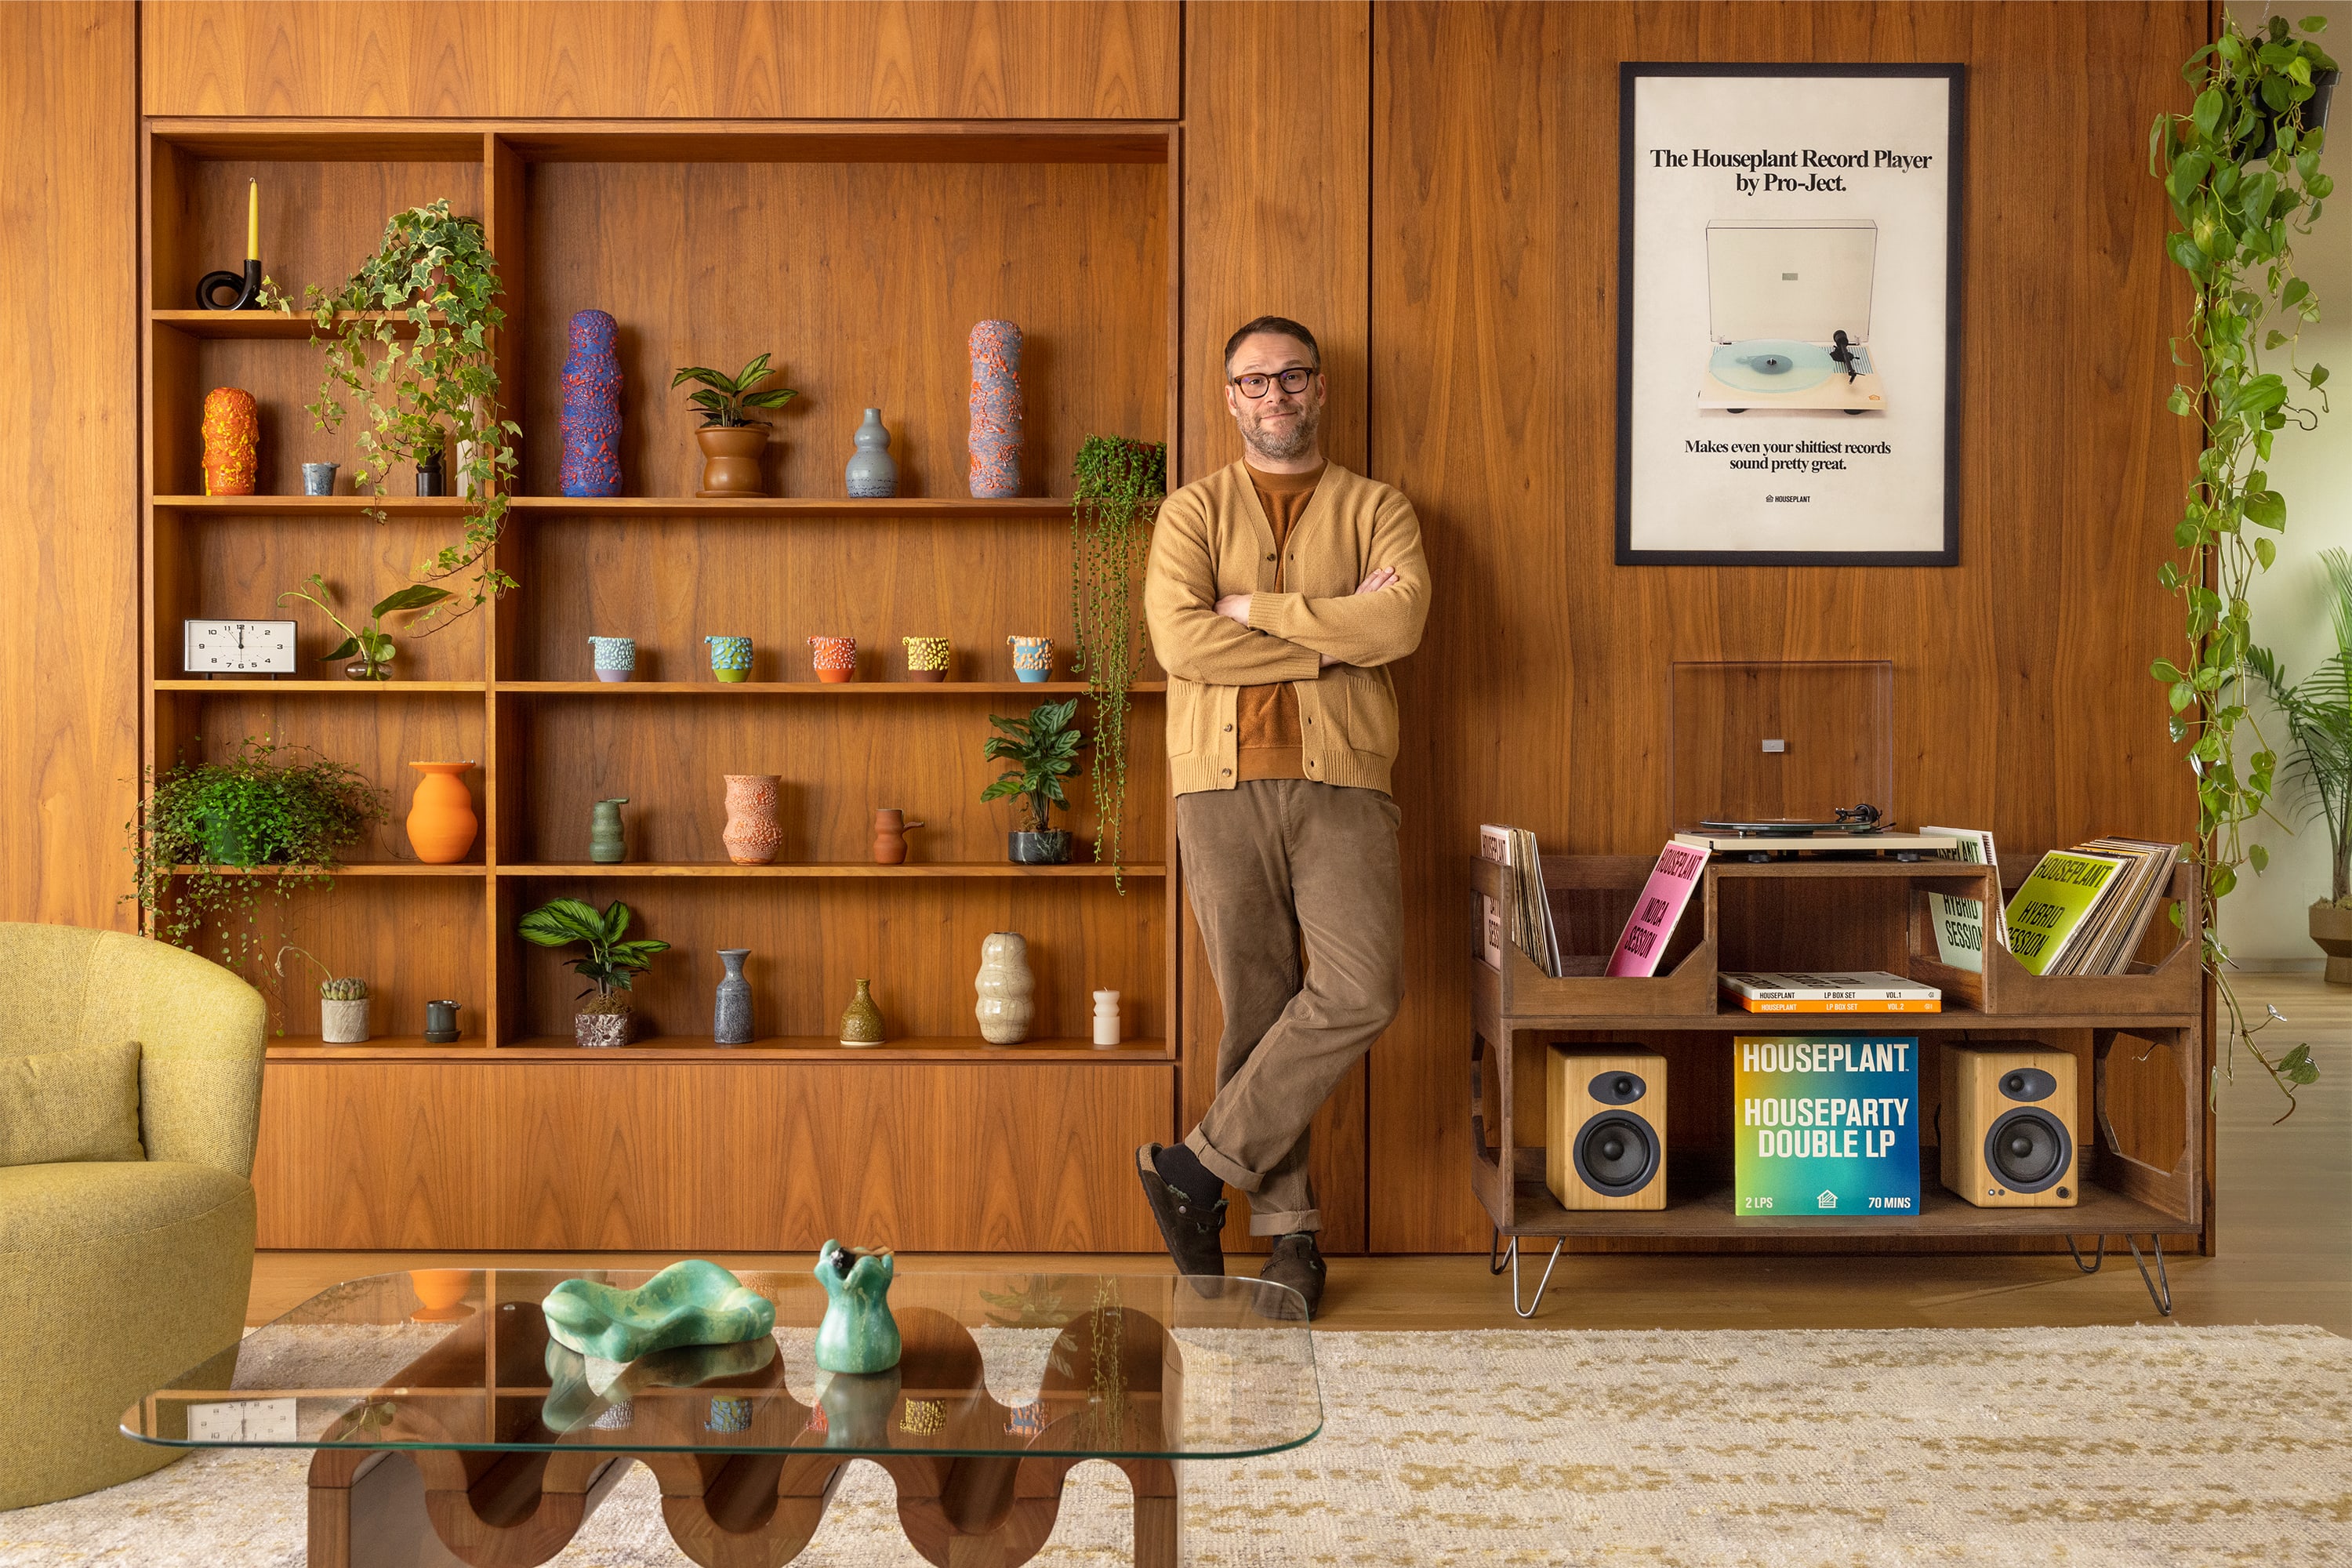 Seth Rogen is pictured at his Houseplant space